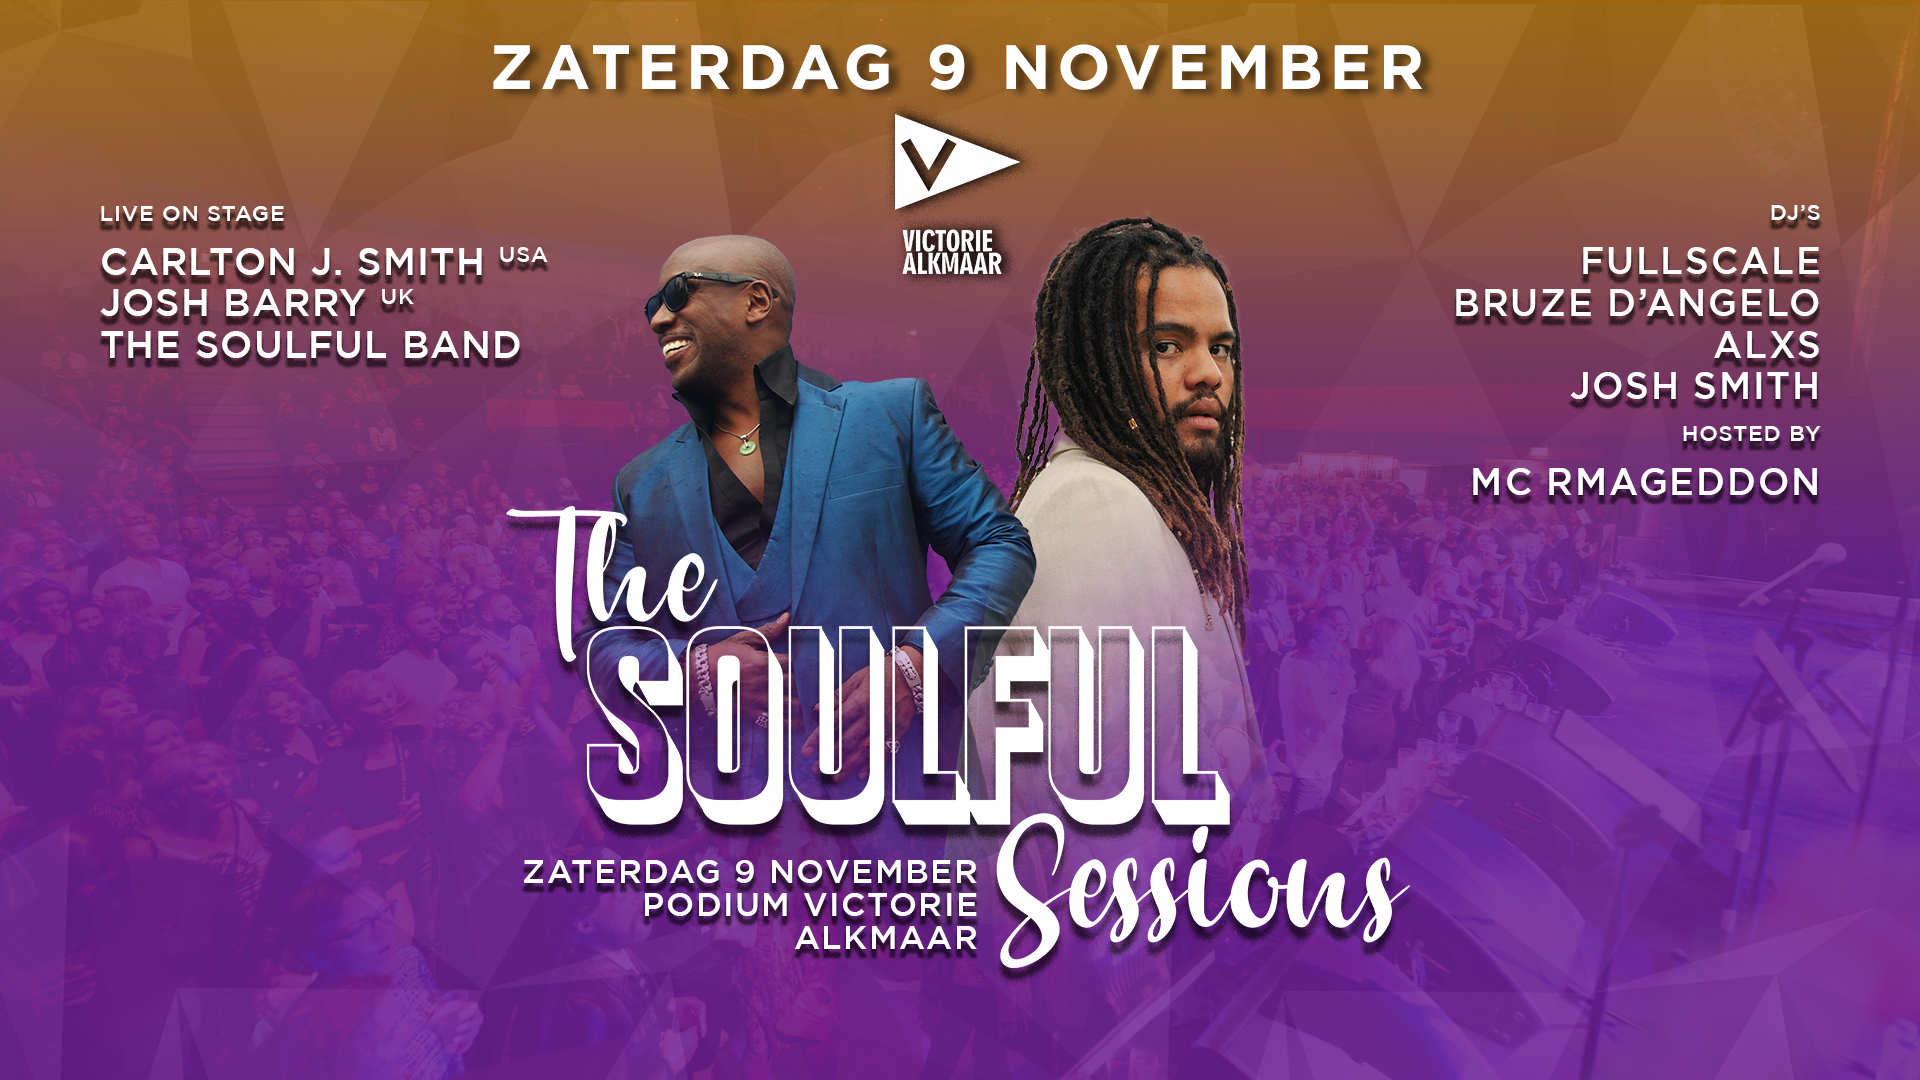 The Soulful Sessions